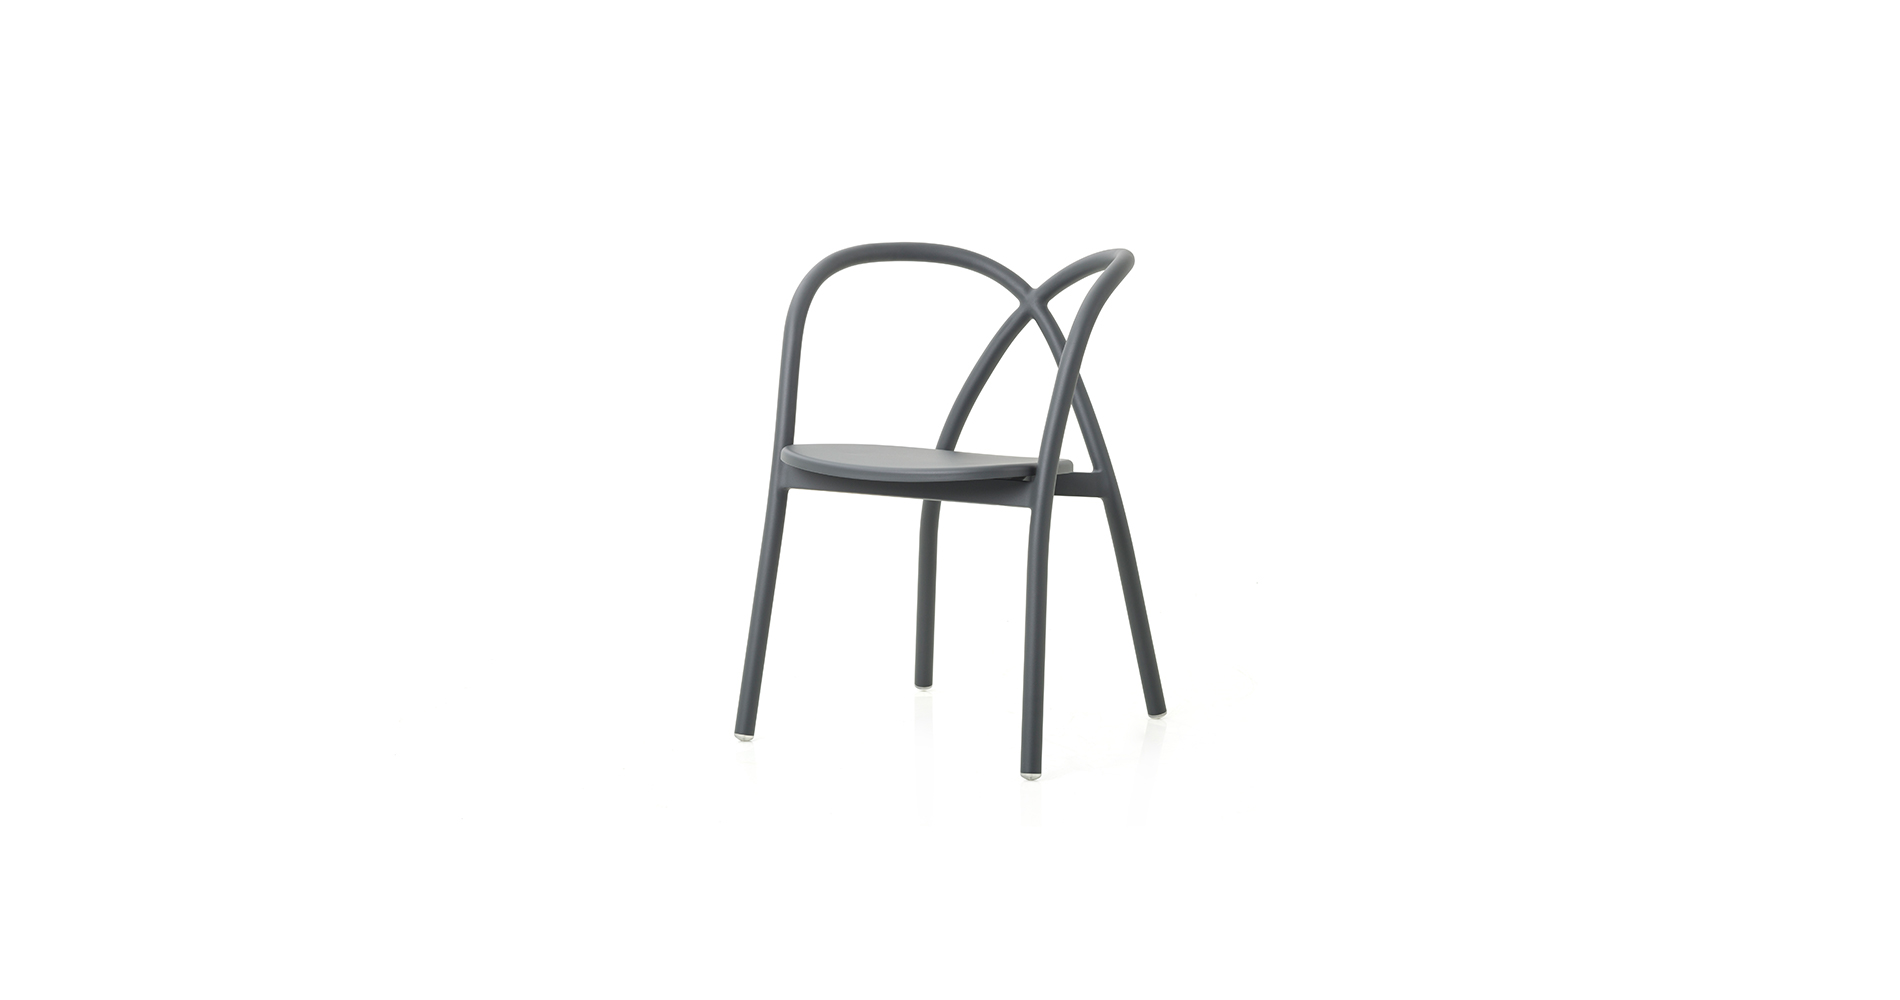 An image of Ming Aluminum Chair